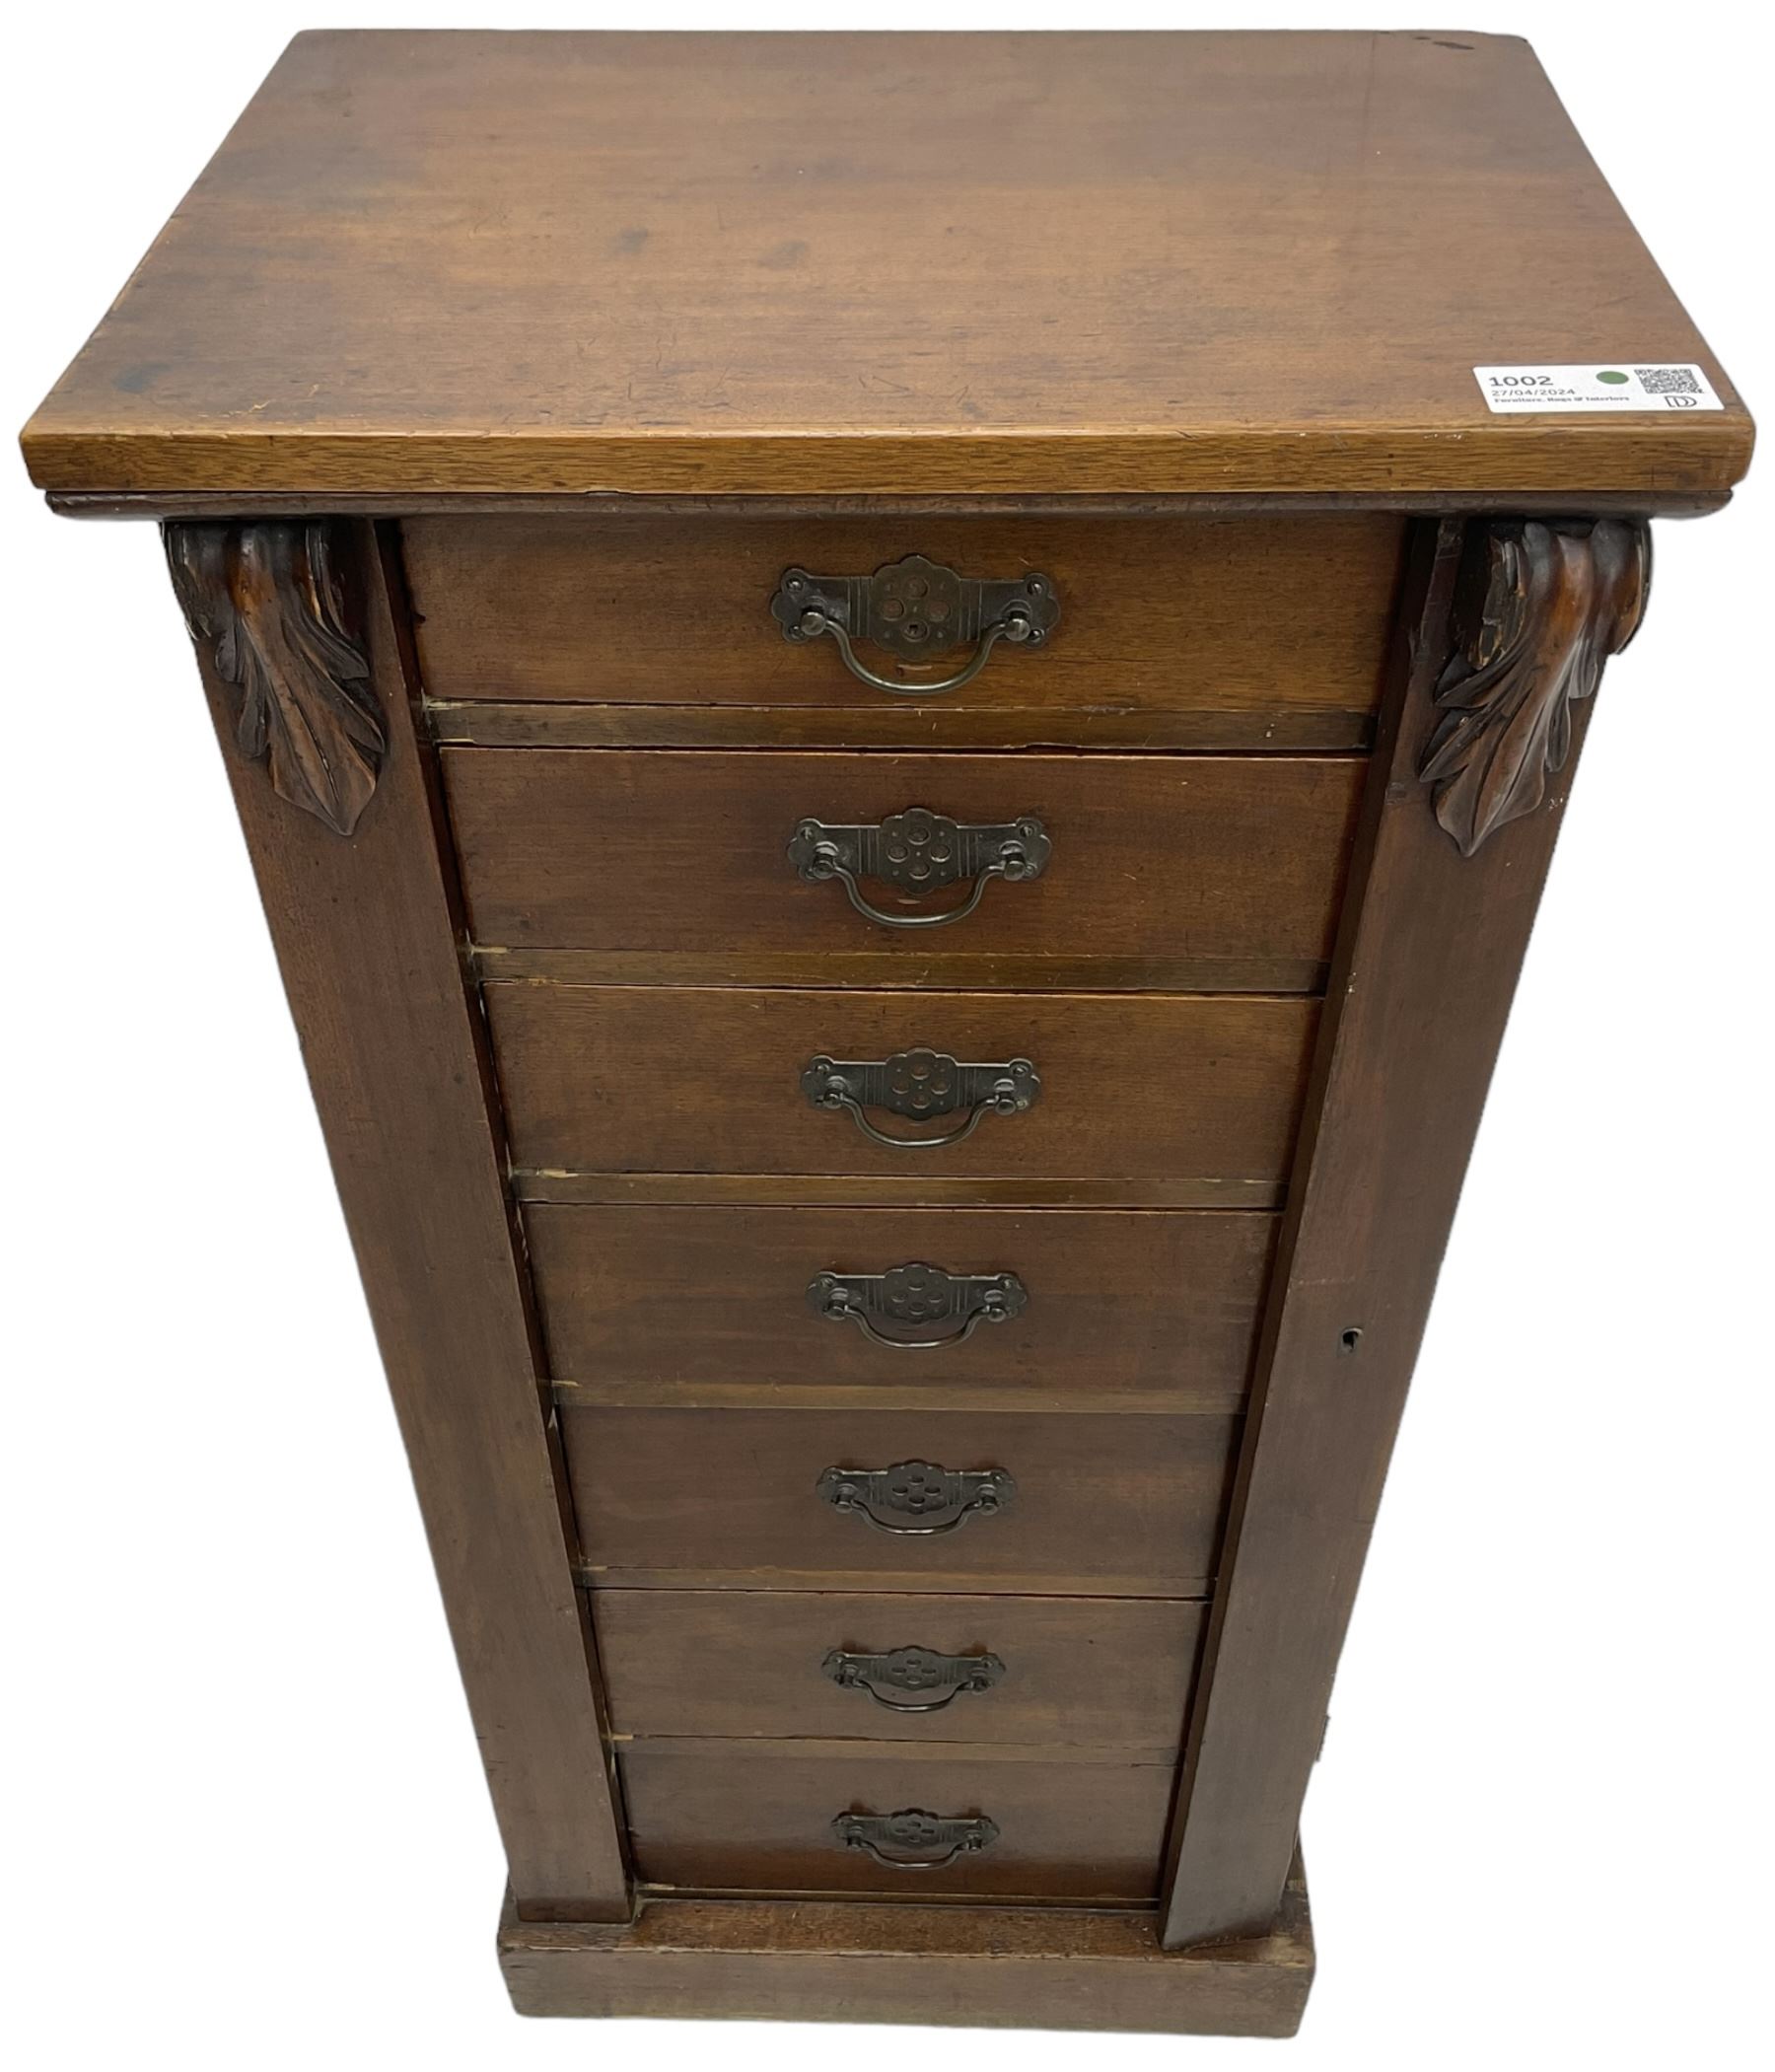 Late Victorian walnut Wellington chest - Image 4 of 6